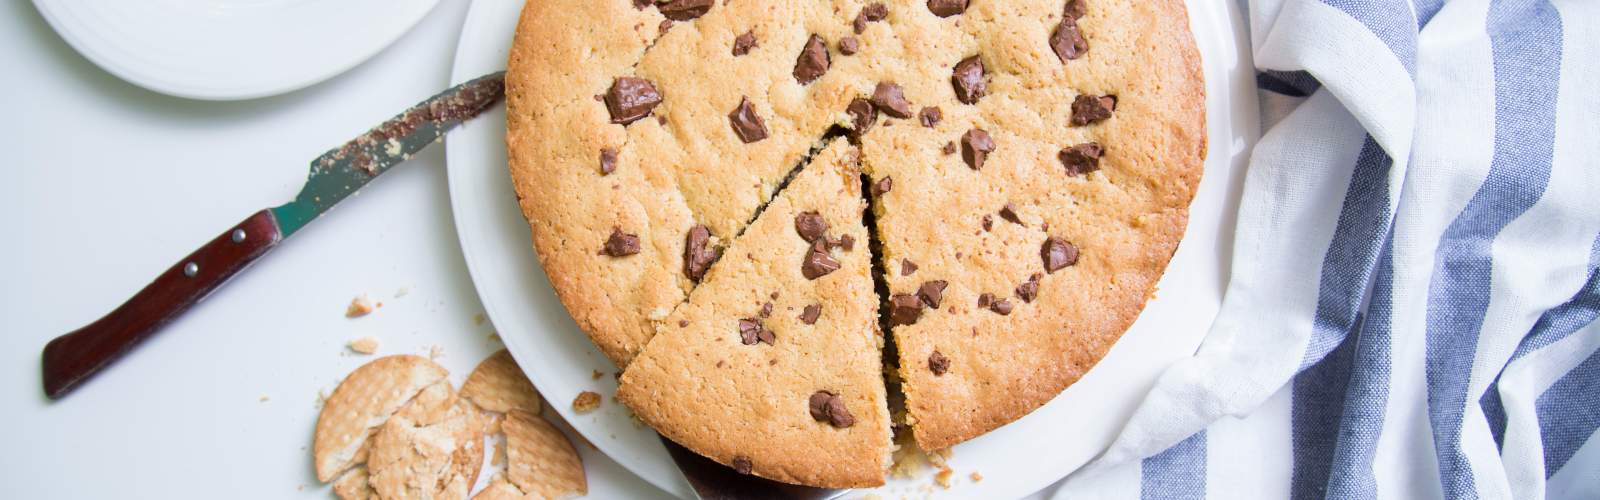 Chocolate & Peanut Butter Cookie Pizza